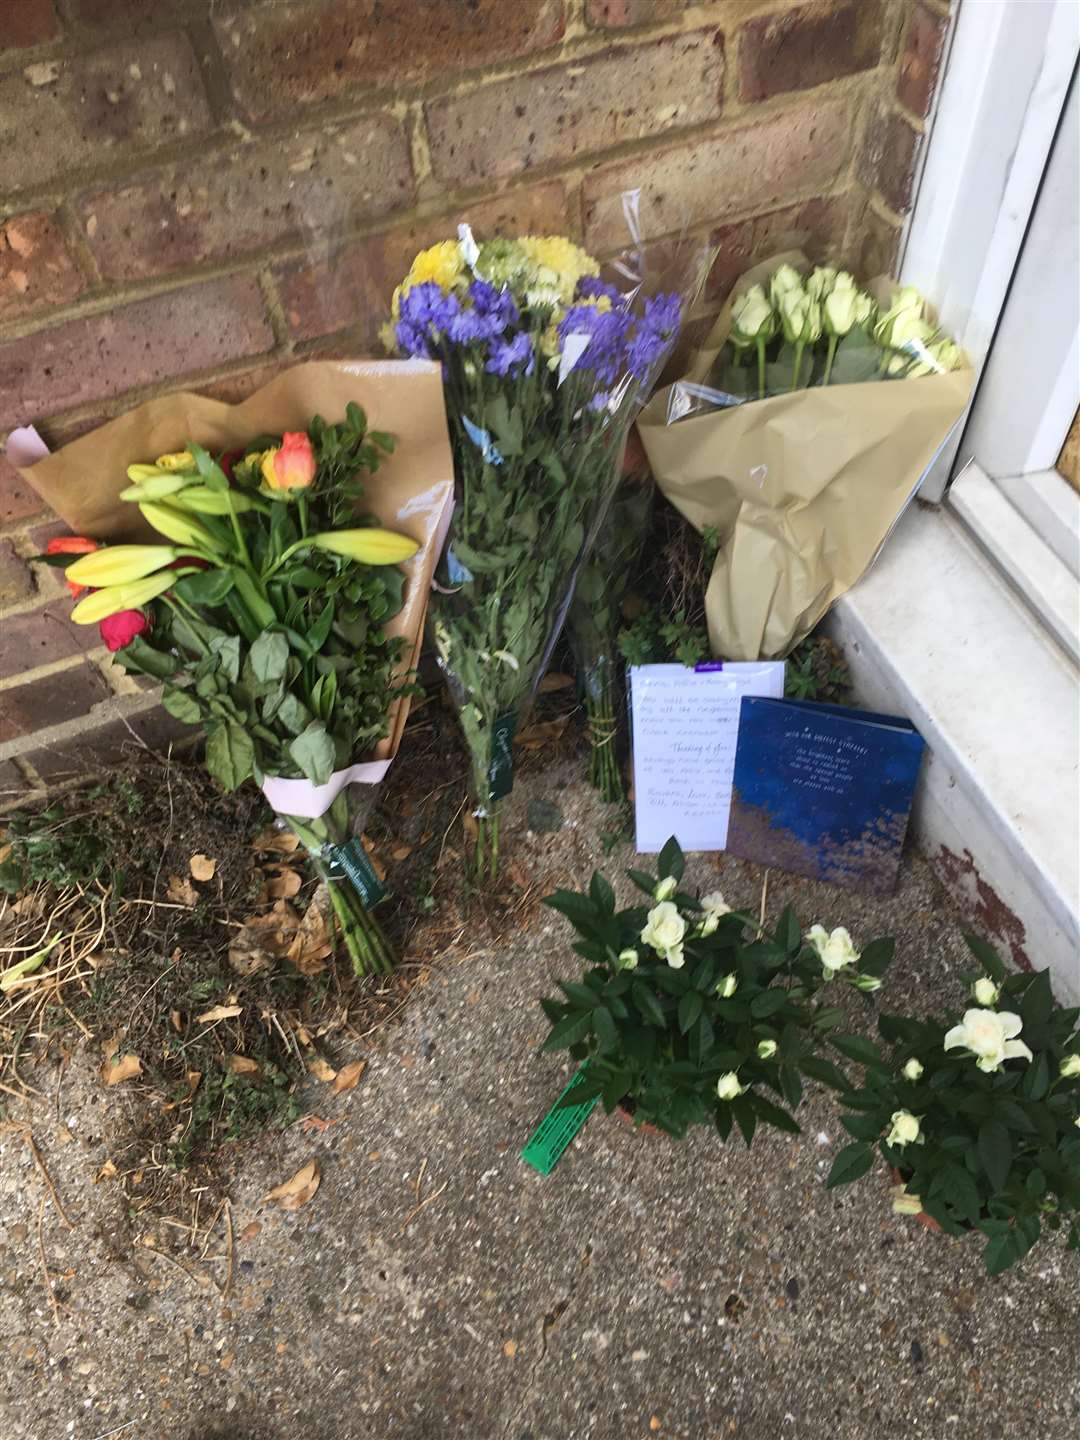 Flowers and cards have been left ouside Chris' home. (4502694)